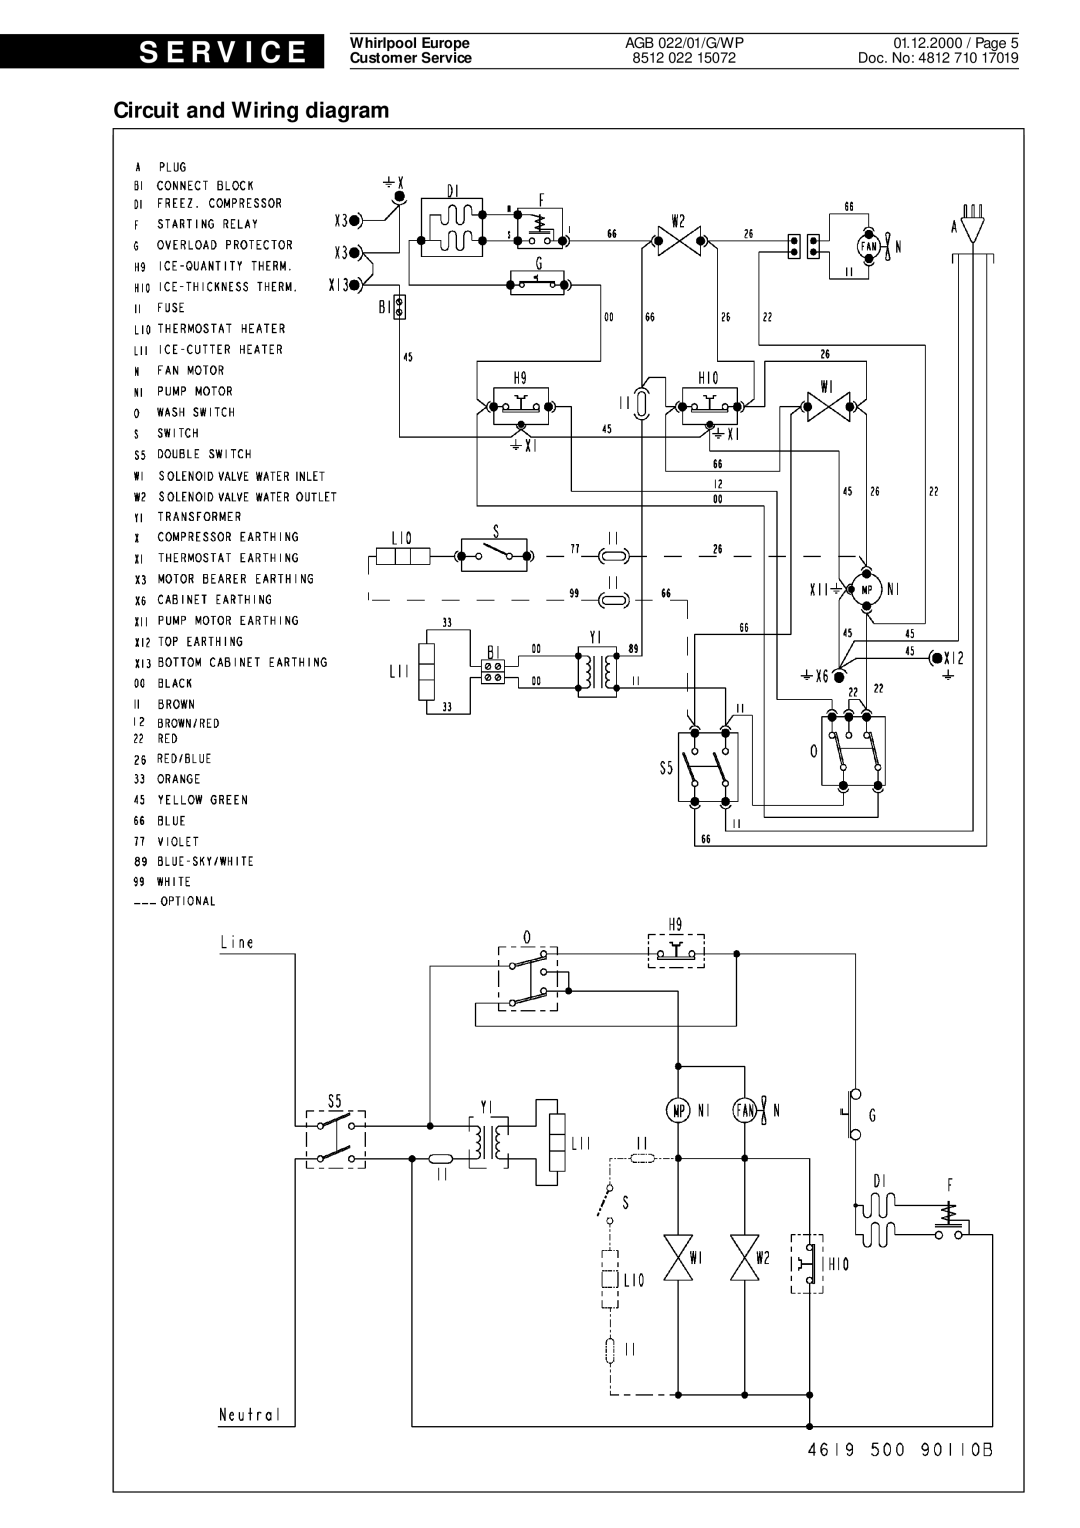 Whirlpool WP, AGB, 22 service manual Circuit and Wiring diagram, S E R V I C E, 01.12.2000 / Page, Doc. No 